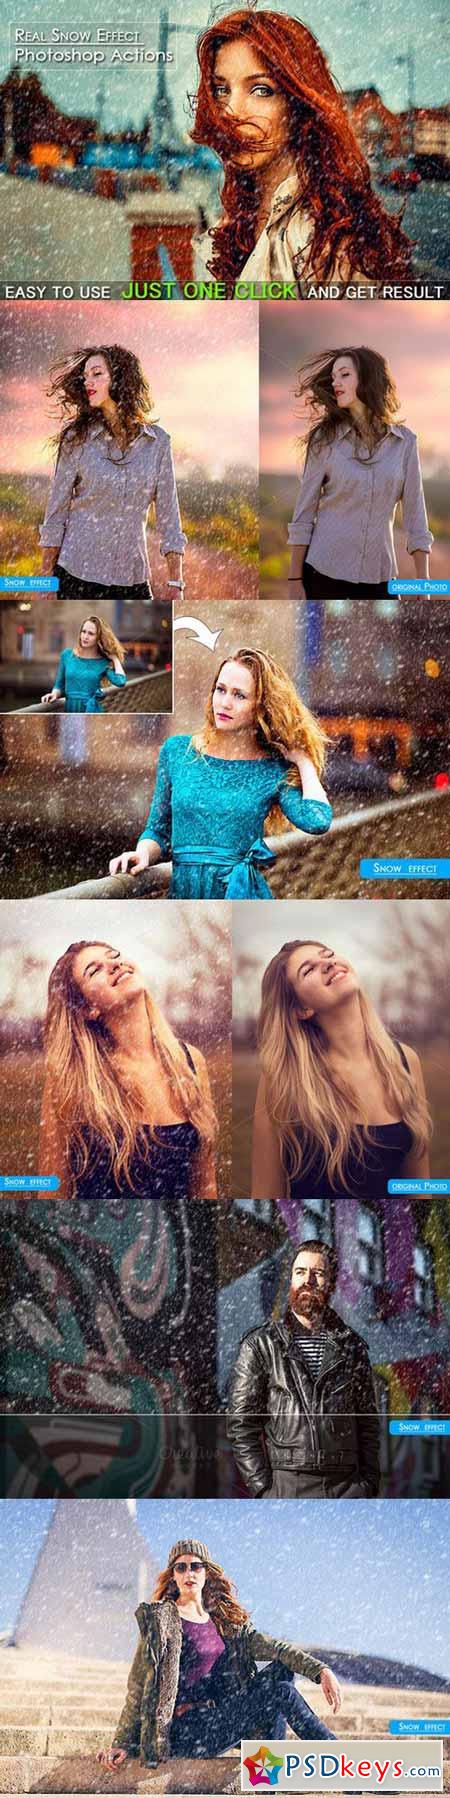 Real Snow Effect Photoshop Actions 576326